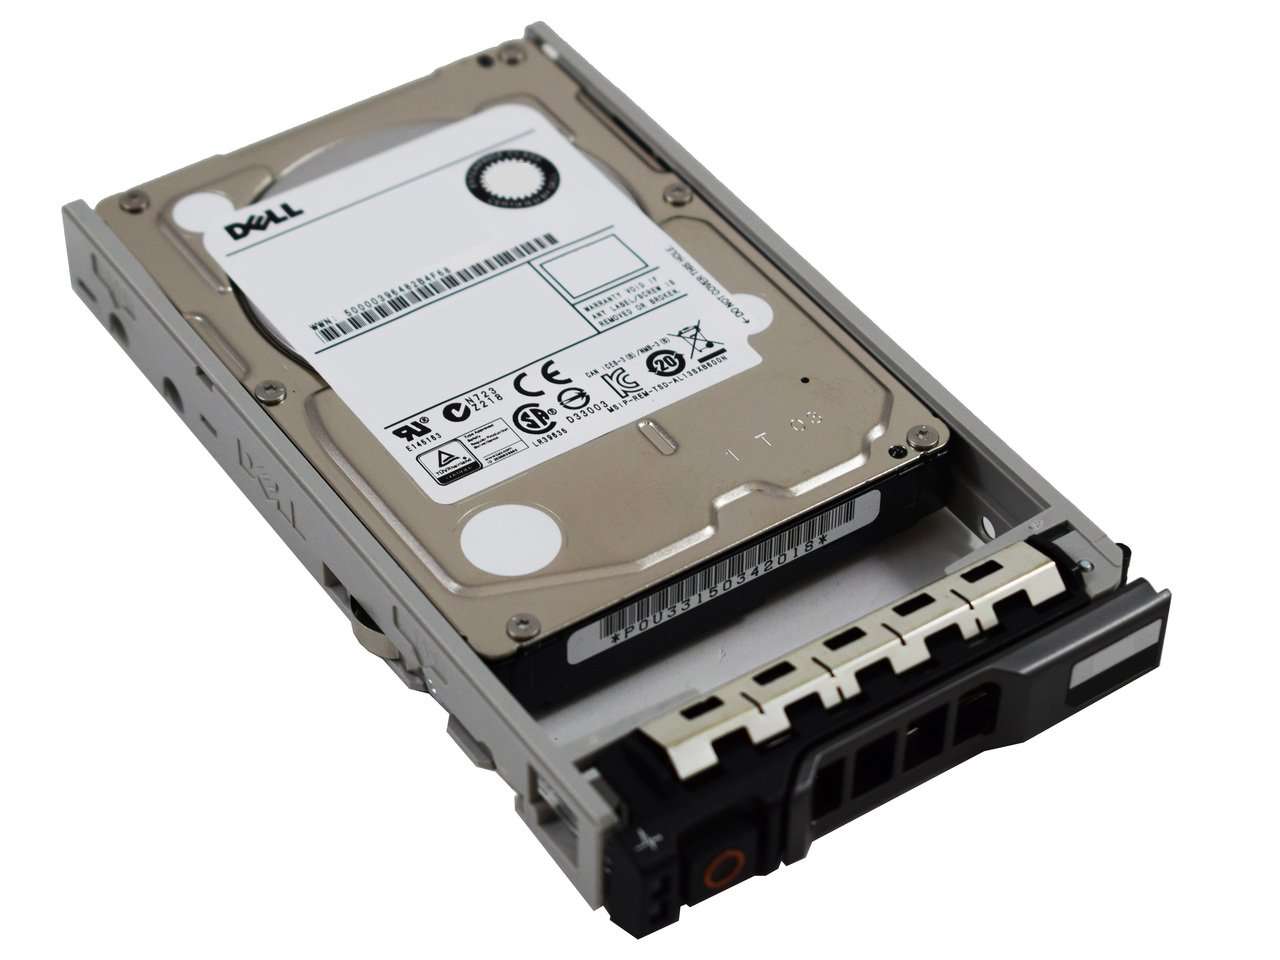 Dell G13 400-23488 600GB 10K RPM SAS 6Gb/s 512n 2.5" Manufacturer Recertified HDD